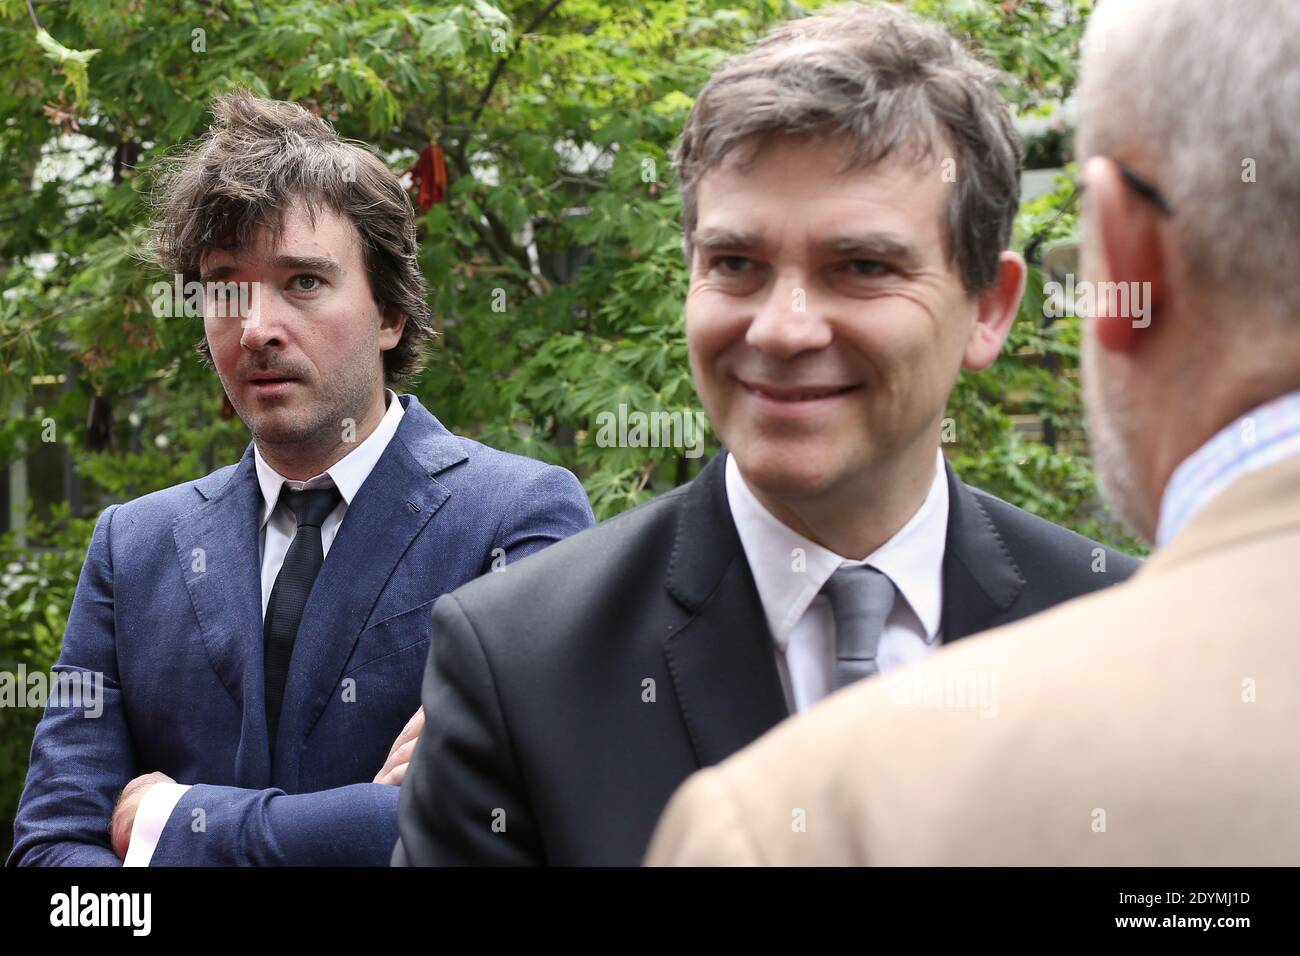 Antoine Arnault and his girlfriend Natalia Vodianova with her son at the  French Tennis Open at Roland Garros arena in Paris, France on June 01,  2013. Photo by ABACAPRESS.COM Stock Photo - Alamy